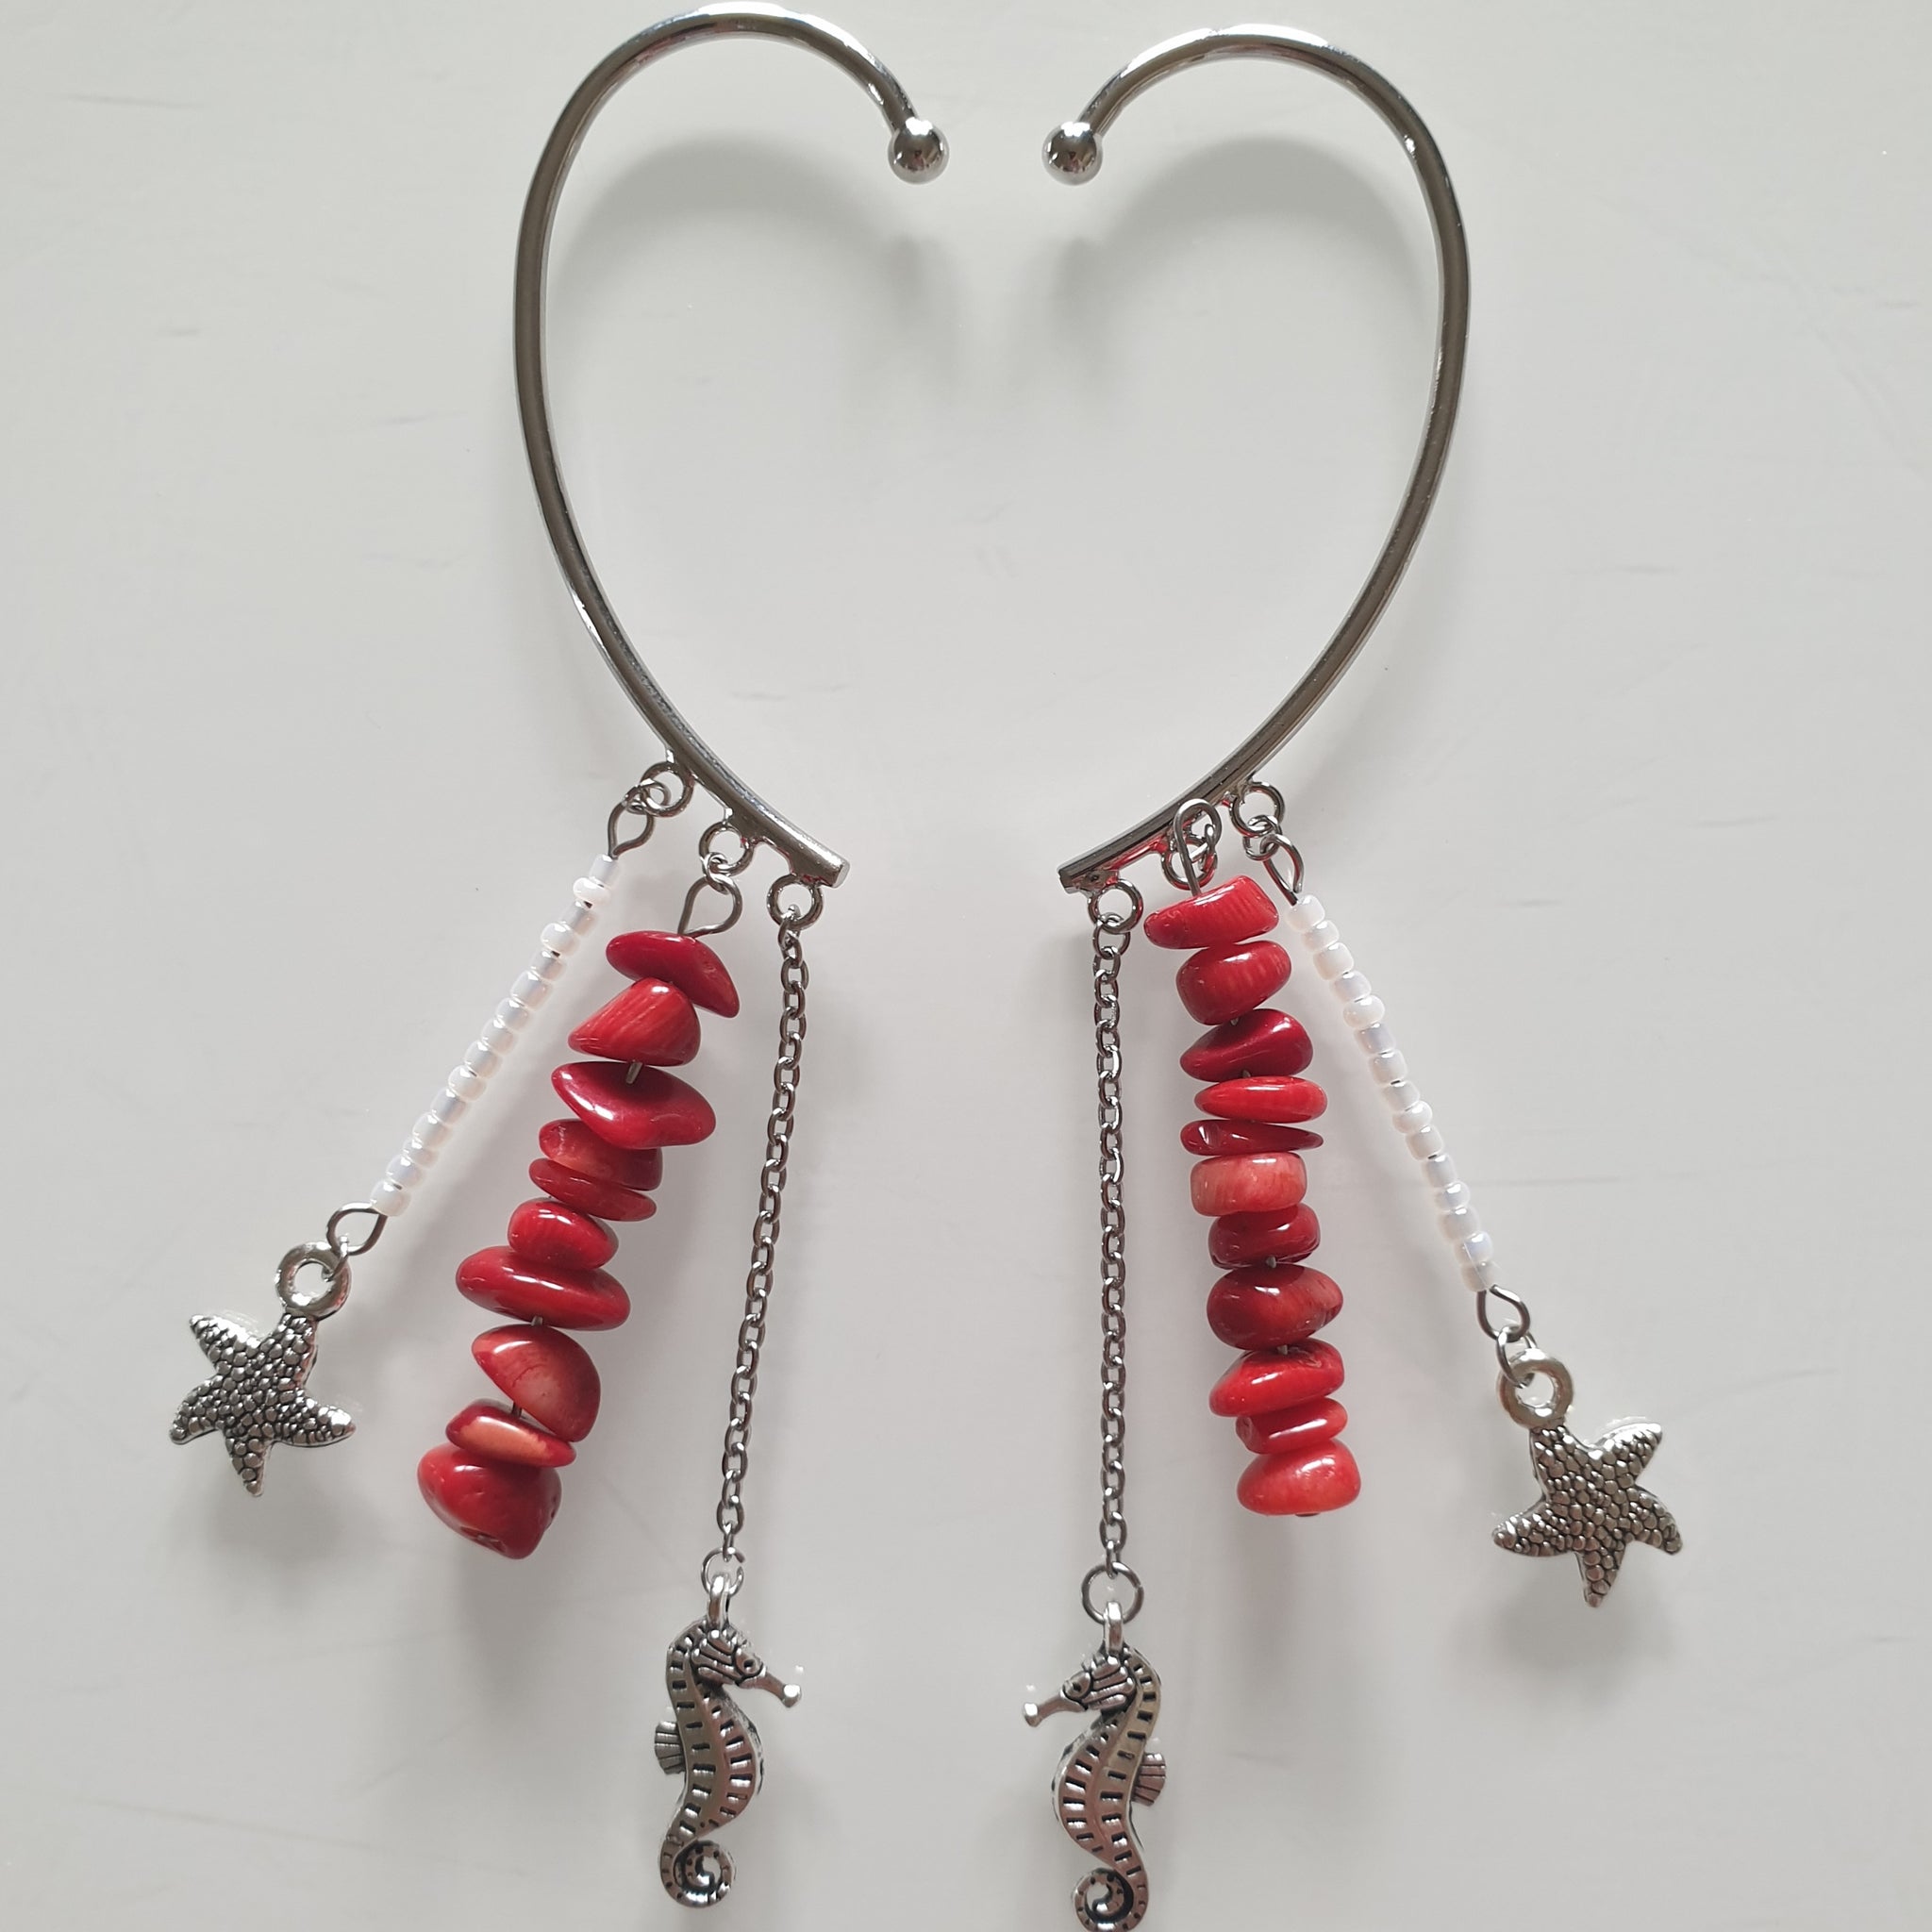 Earcuffs (2 pieces) 925 silver plated - coral reef